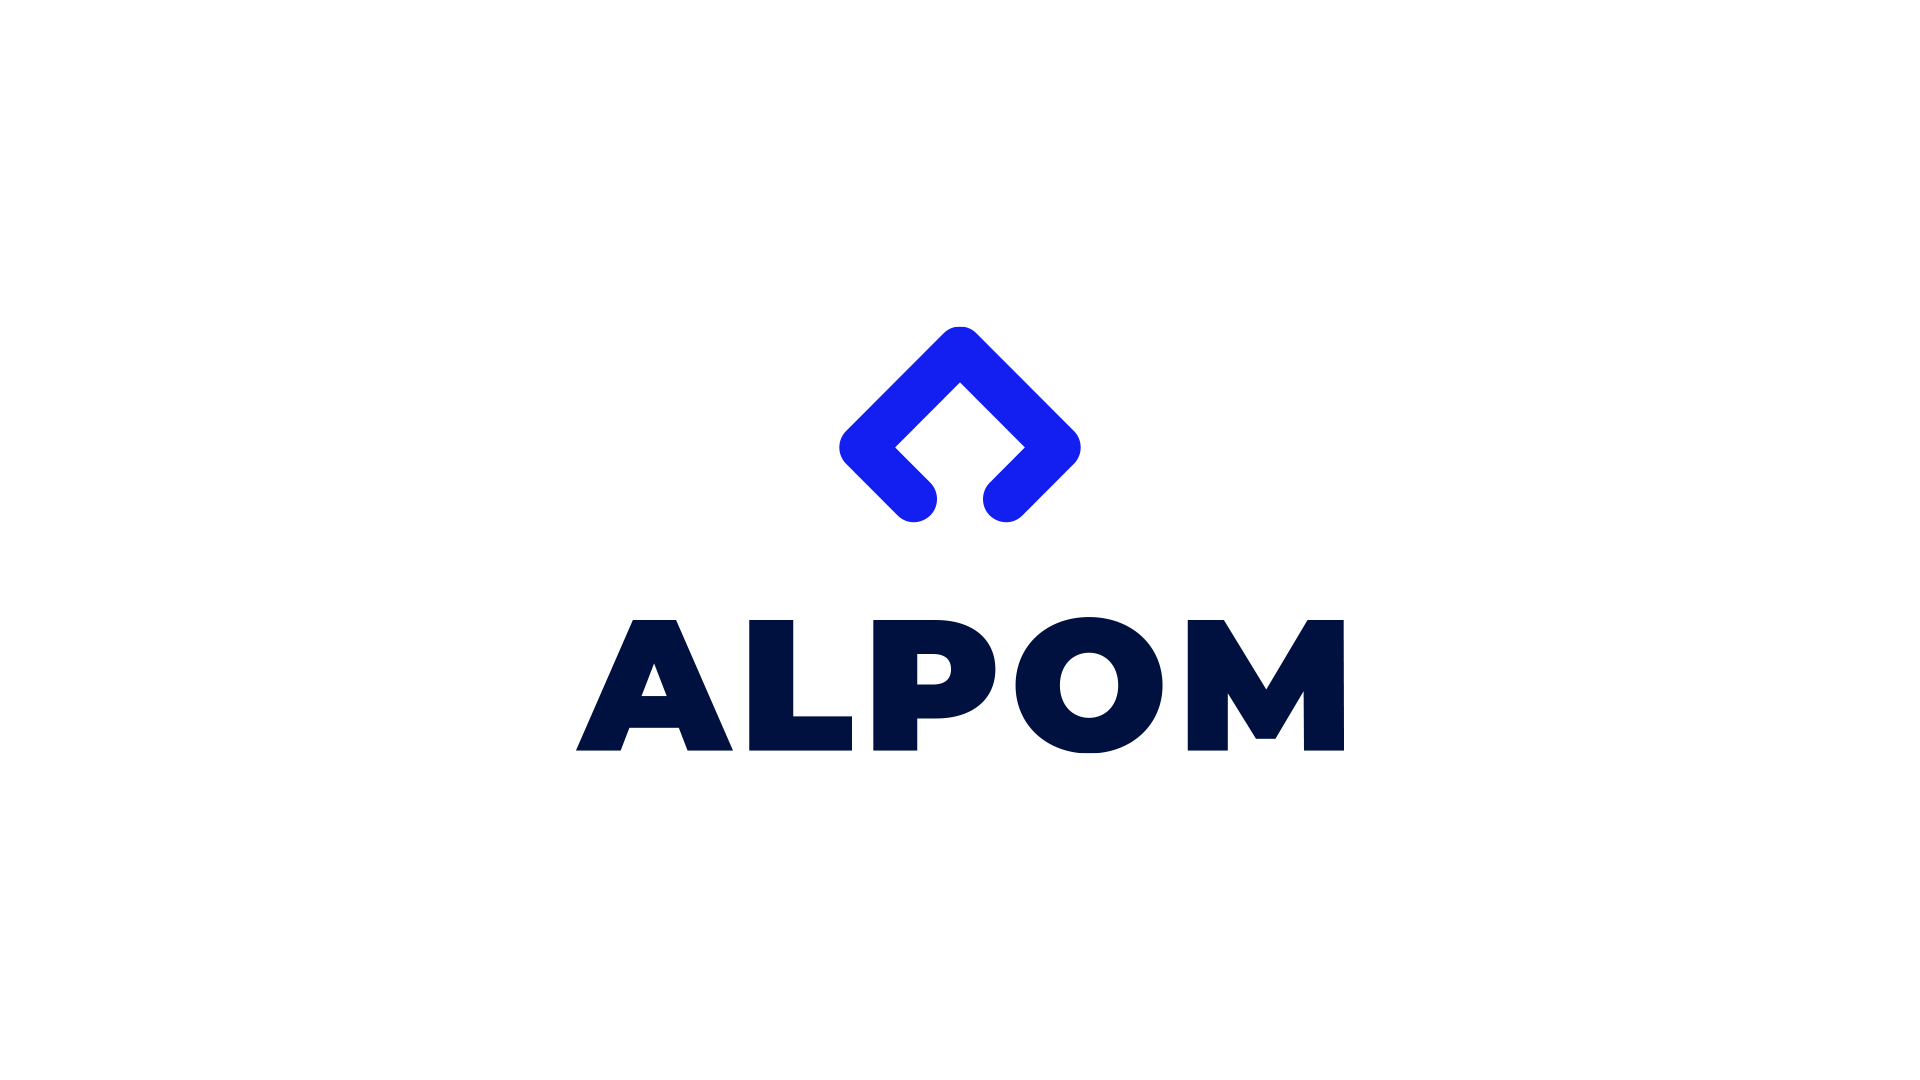 GIF displaying Alpom's vertical and horizontal logo lockups on dark blue, and white backgrounds.